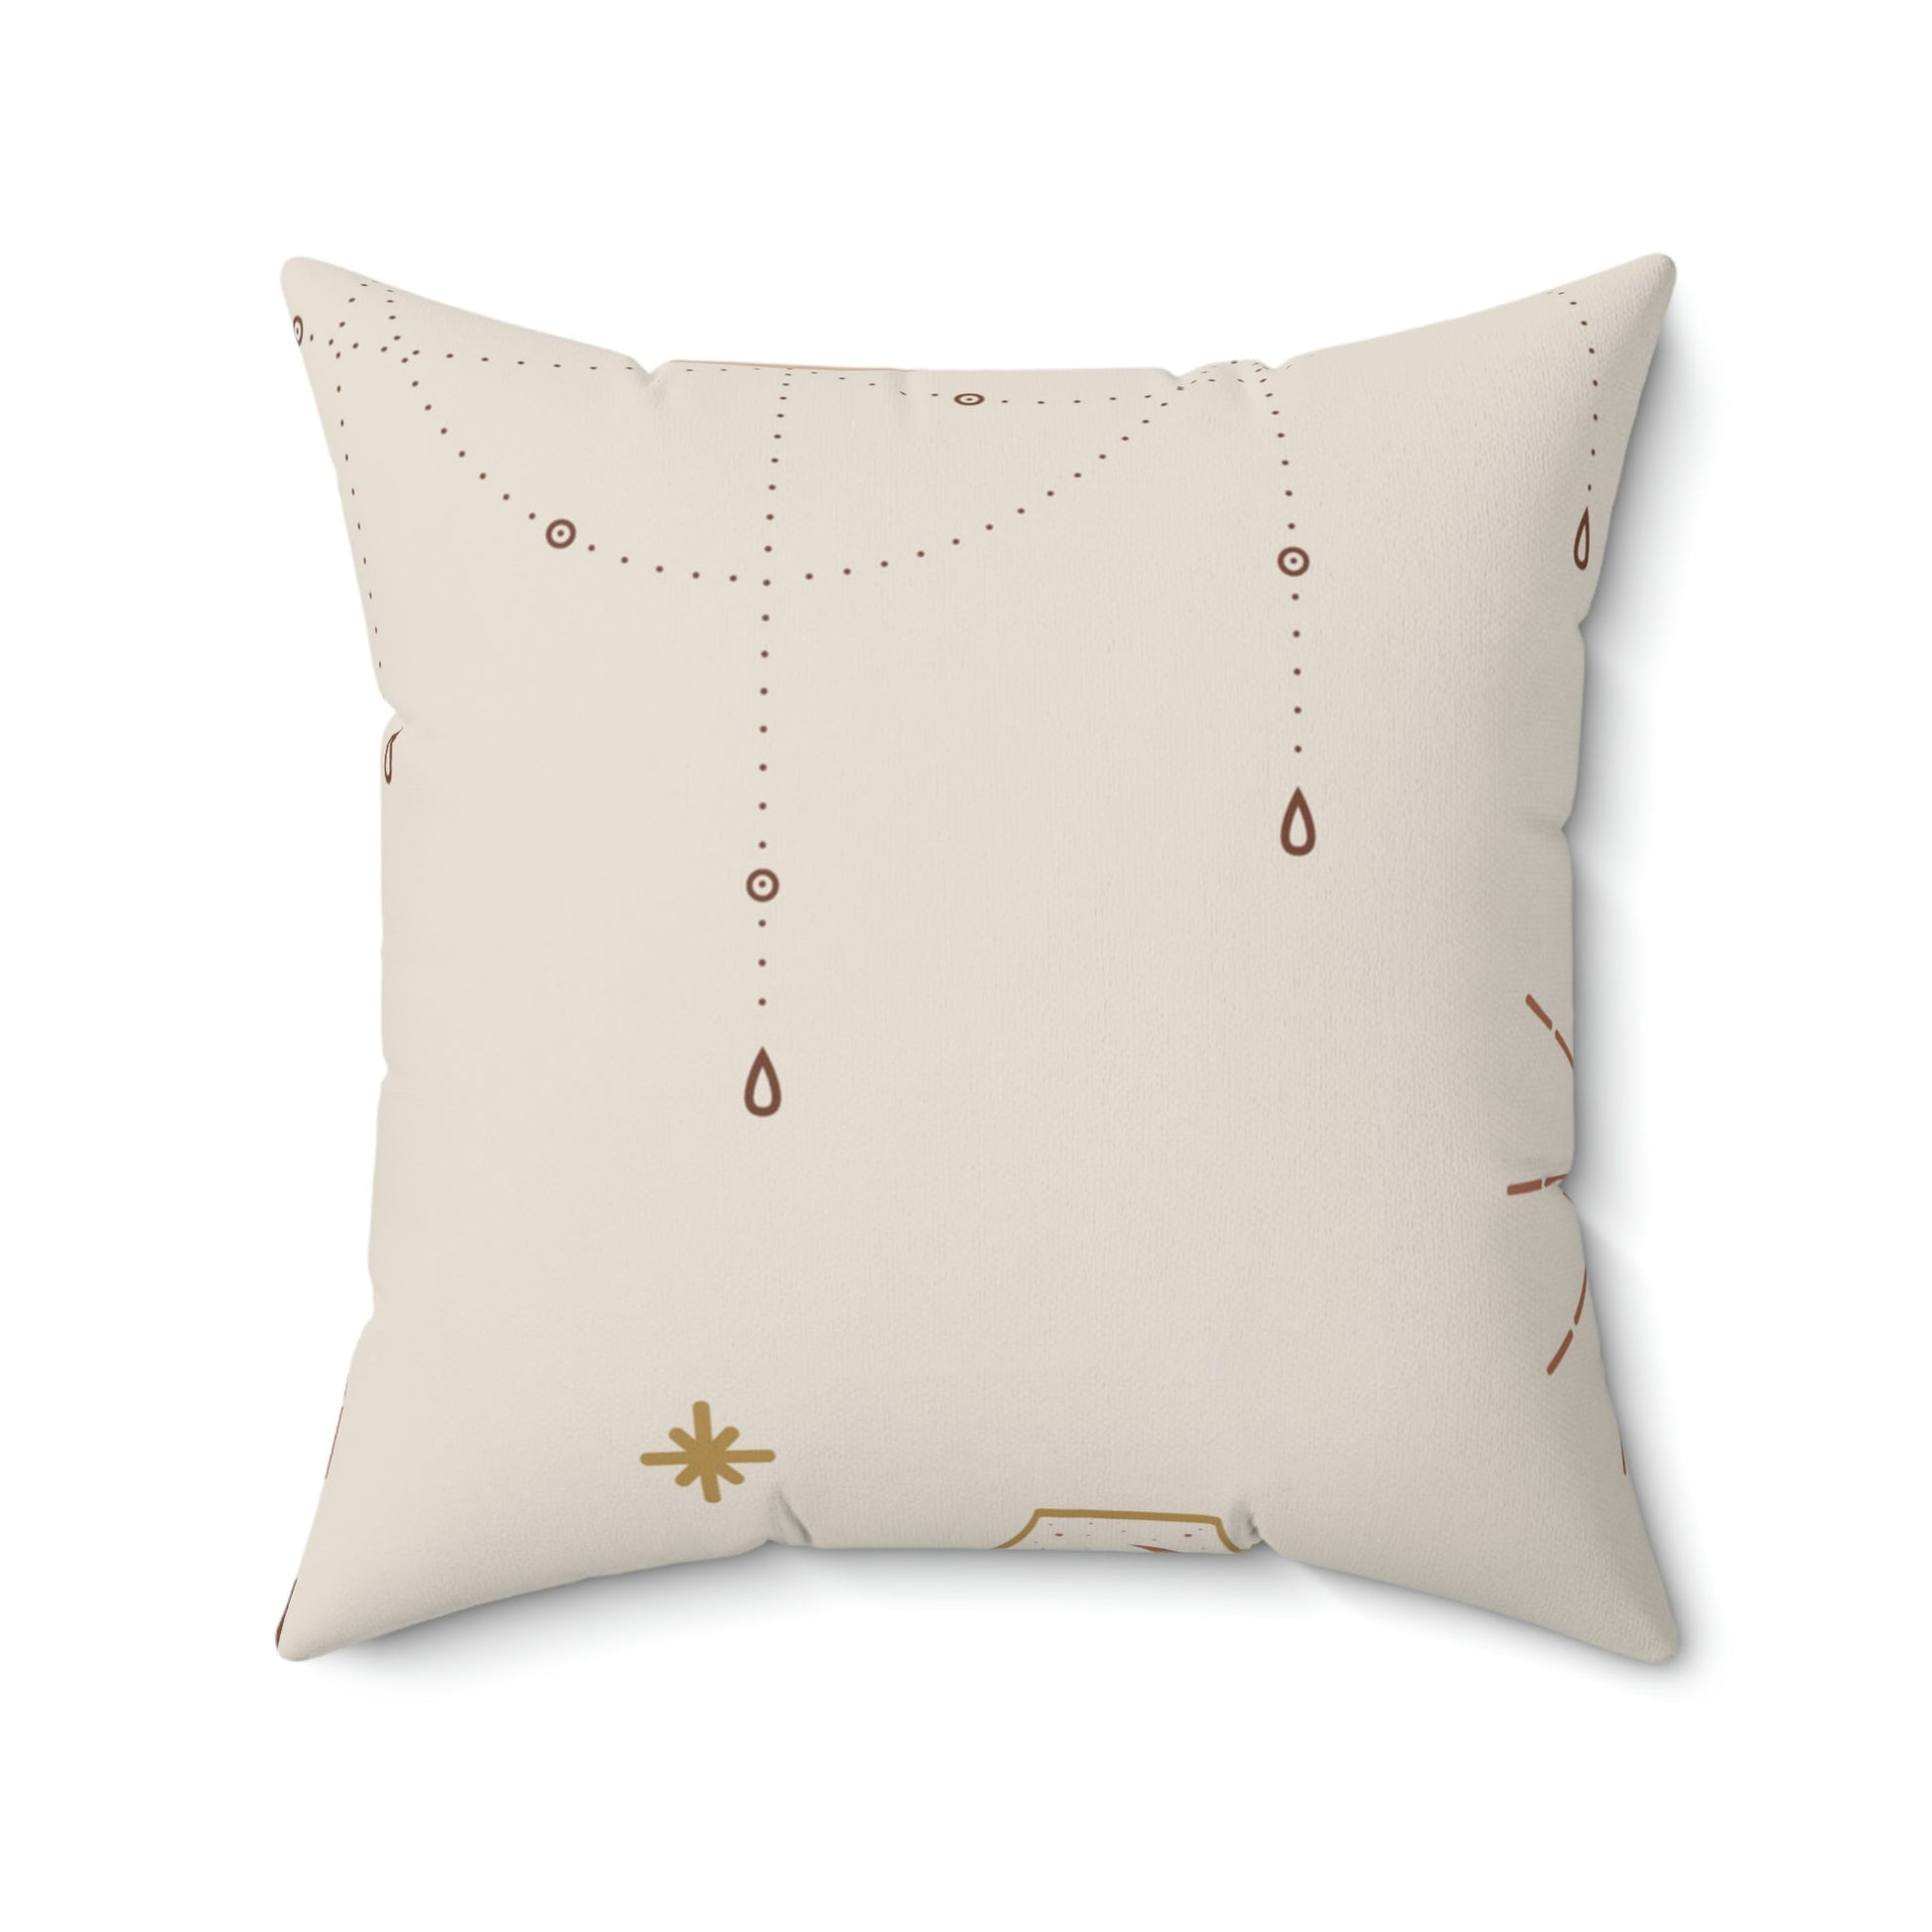 The Lunar Manifest Square Pillow Home Decor Pink Sweetheart